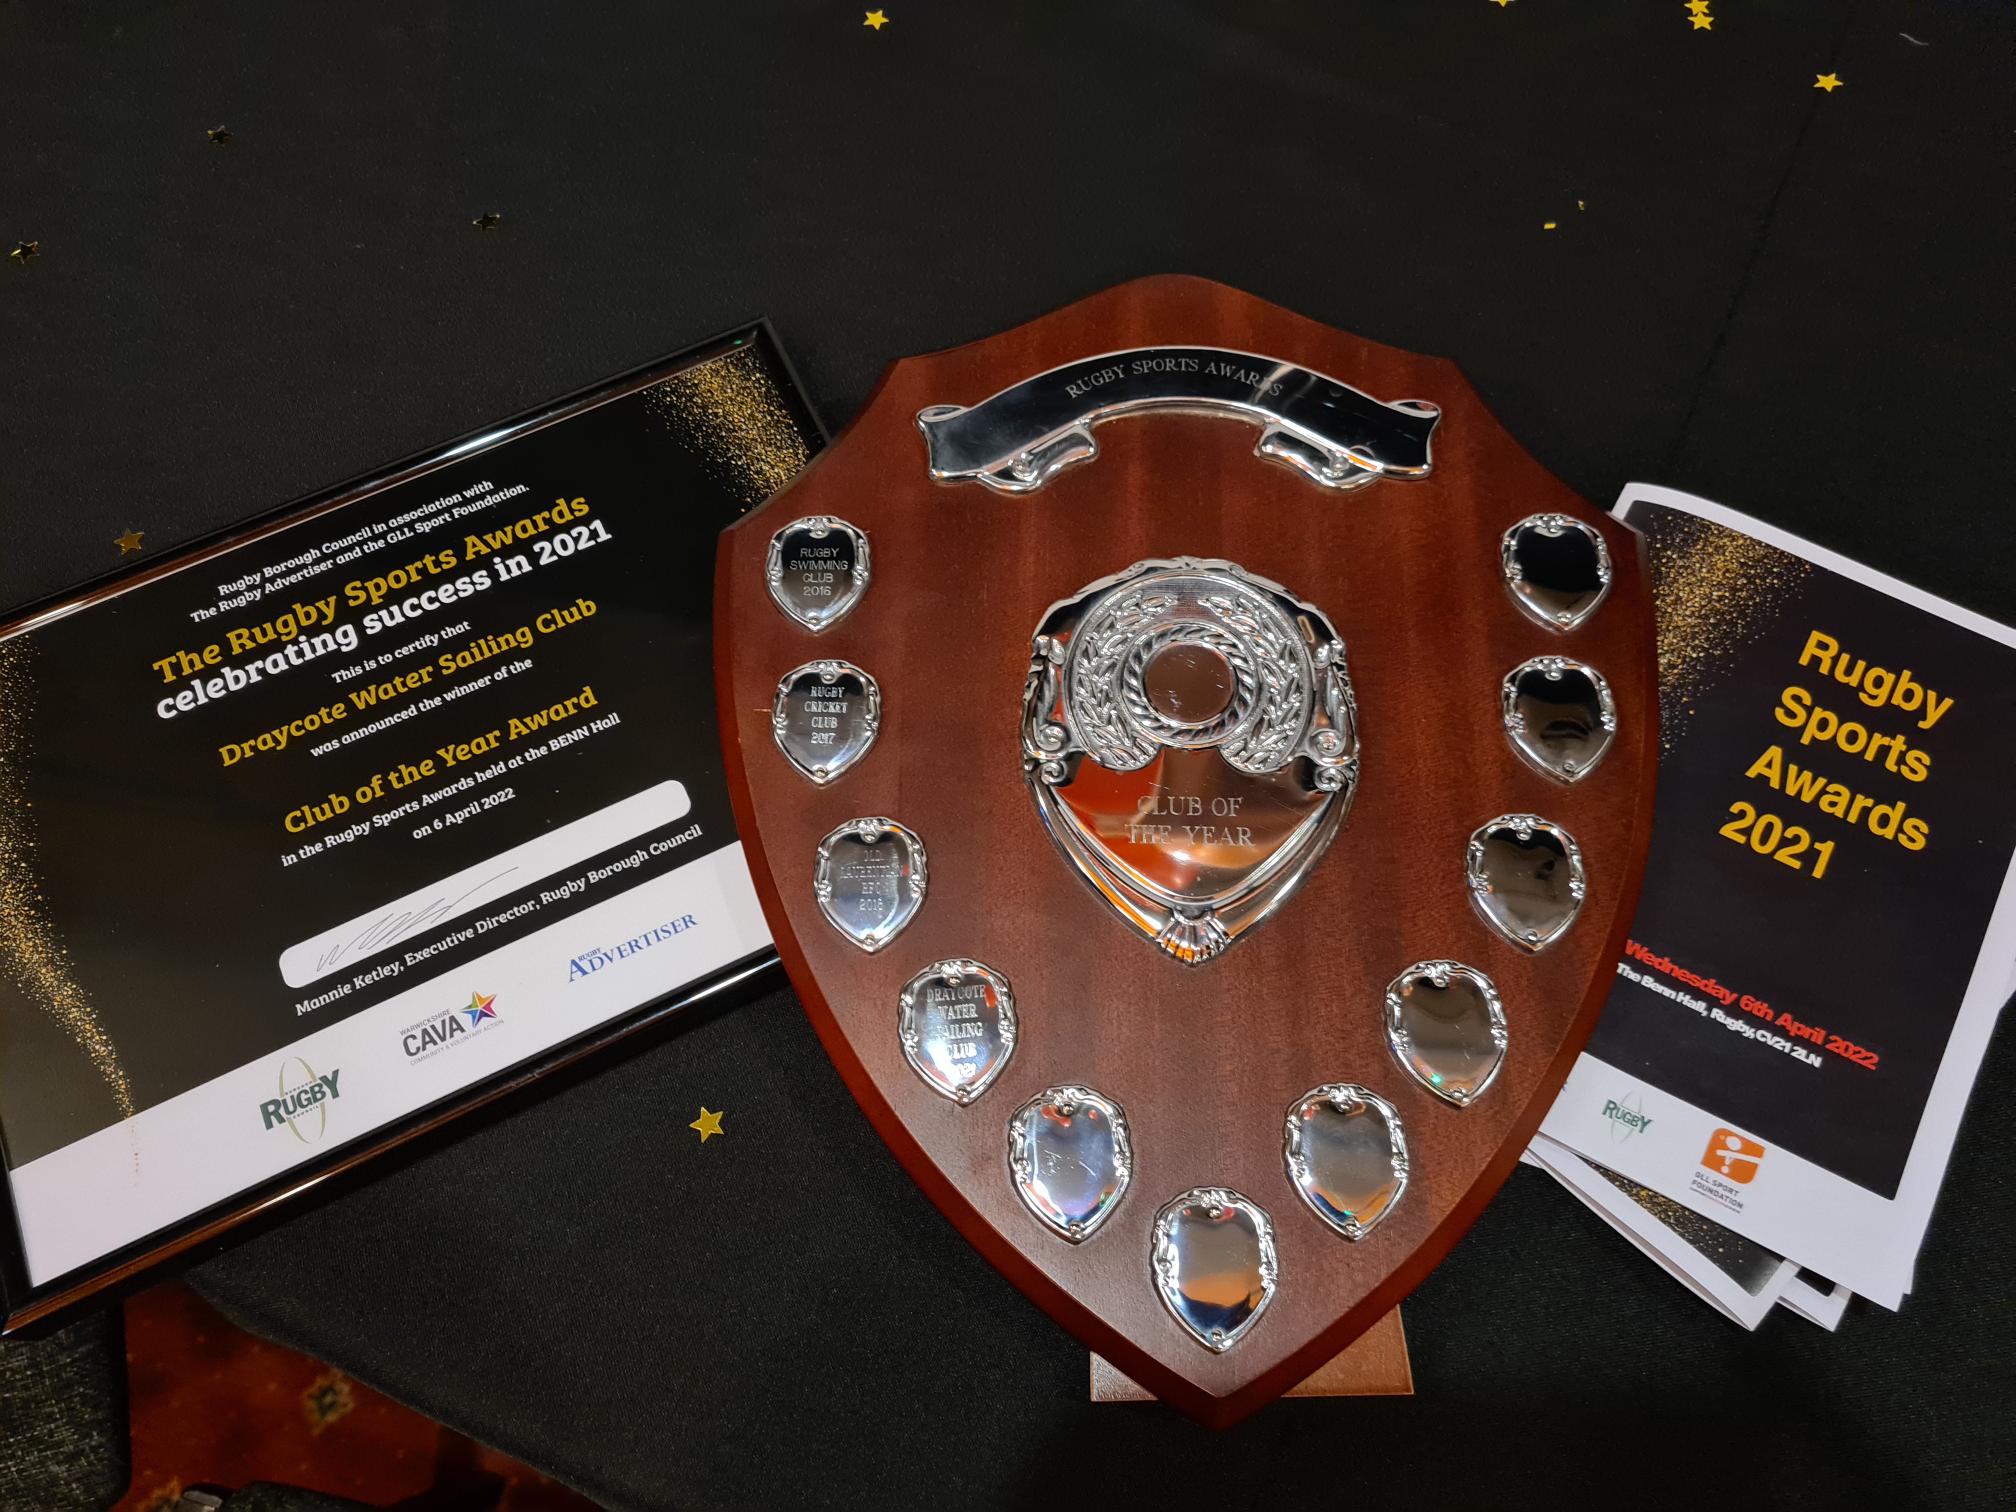 Rugby Sports Awards winners